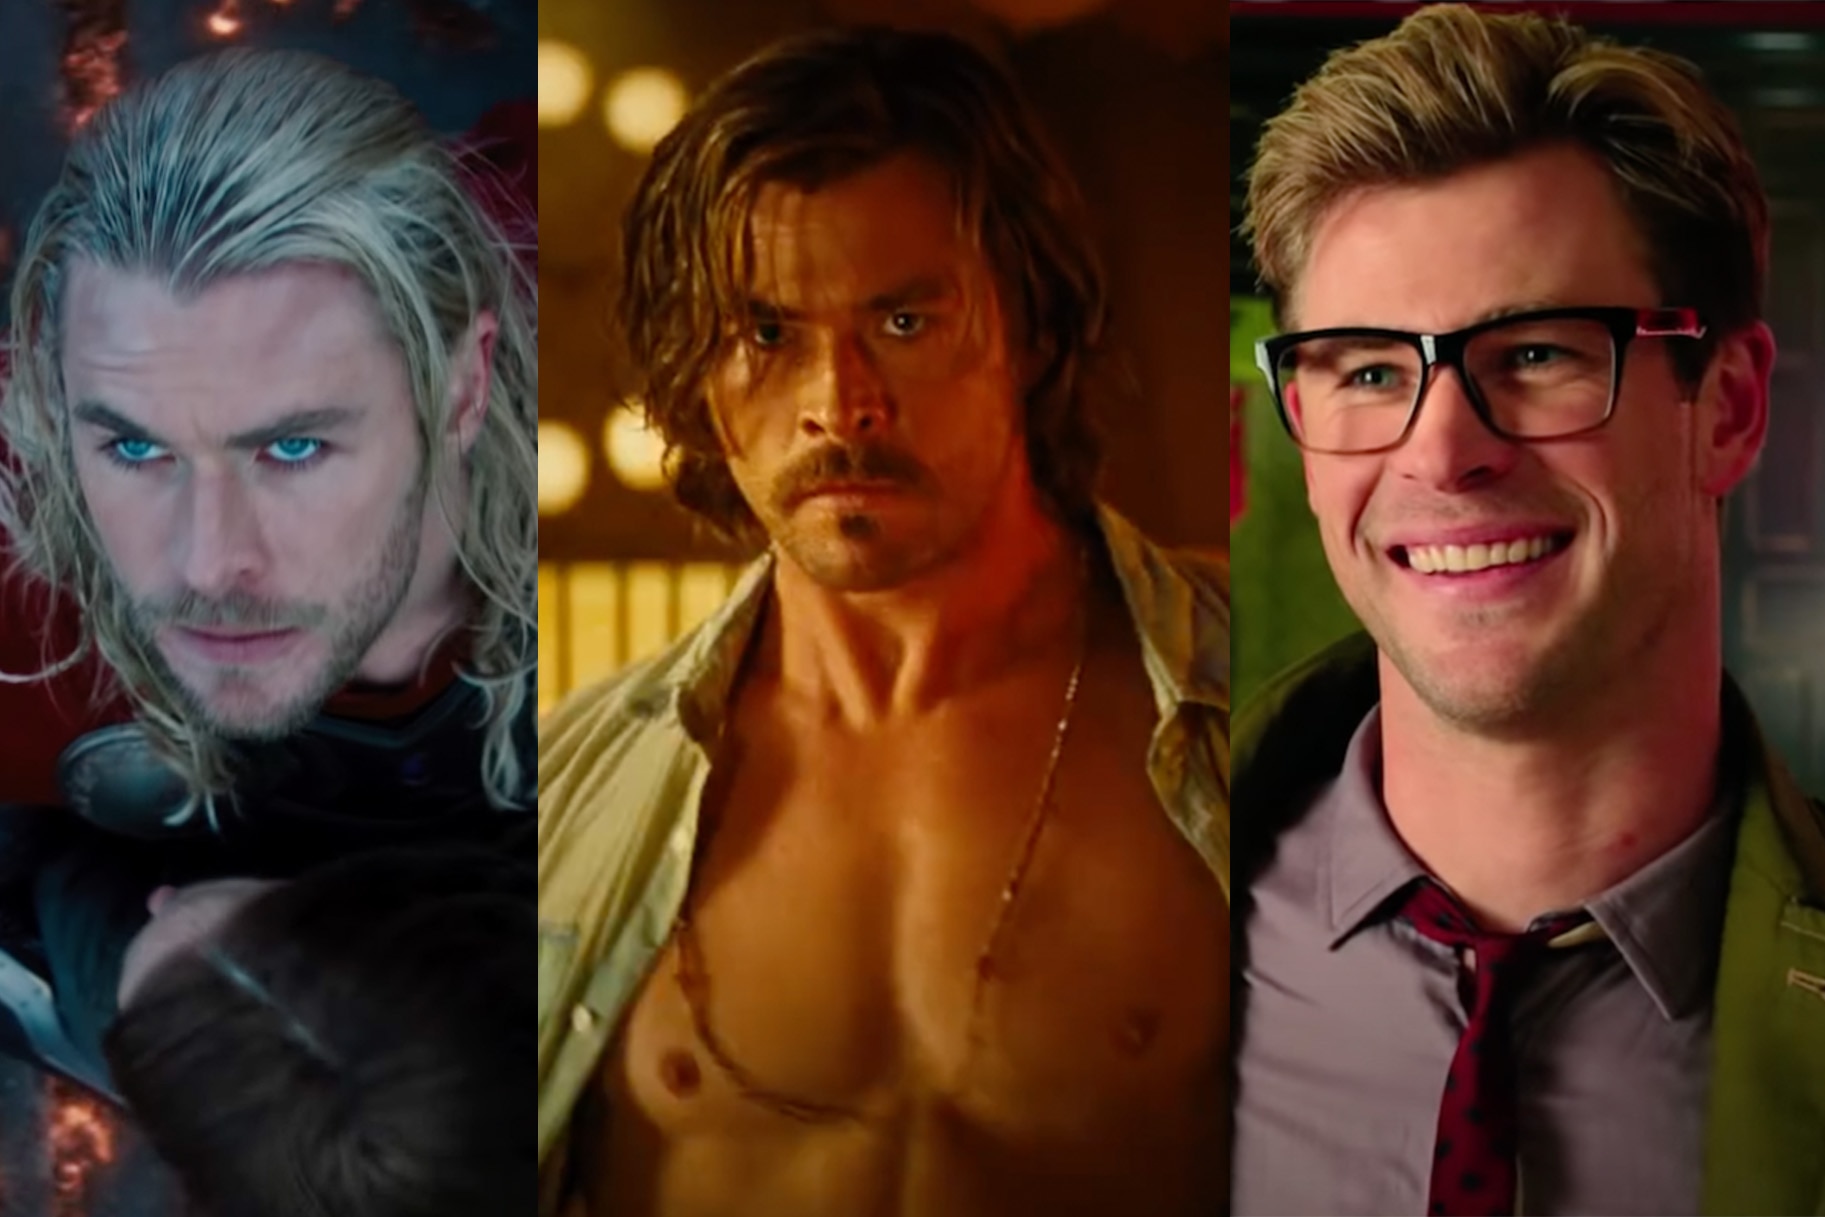 Which look do you prefer for THOR? Share your opinions and